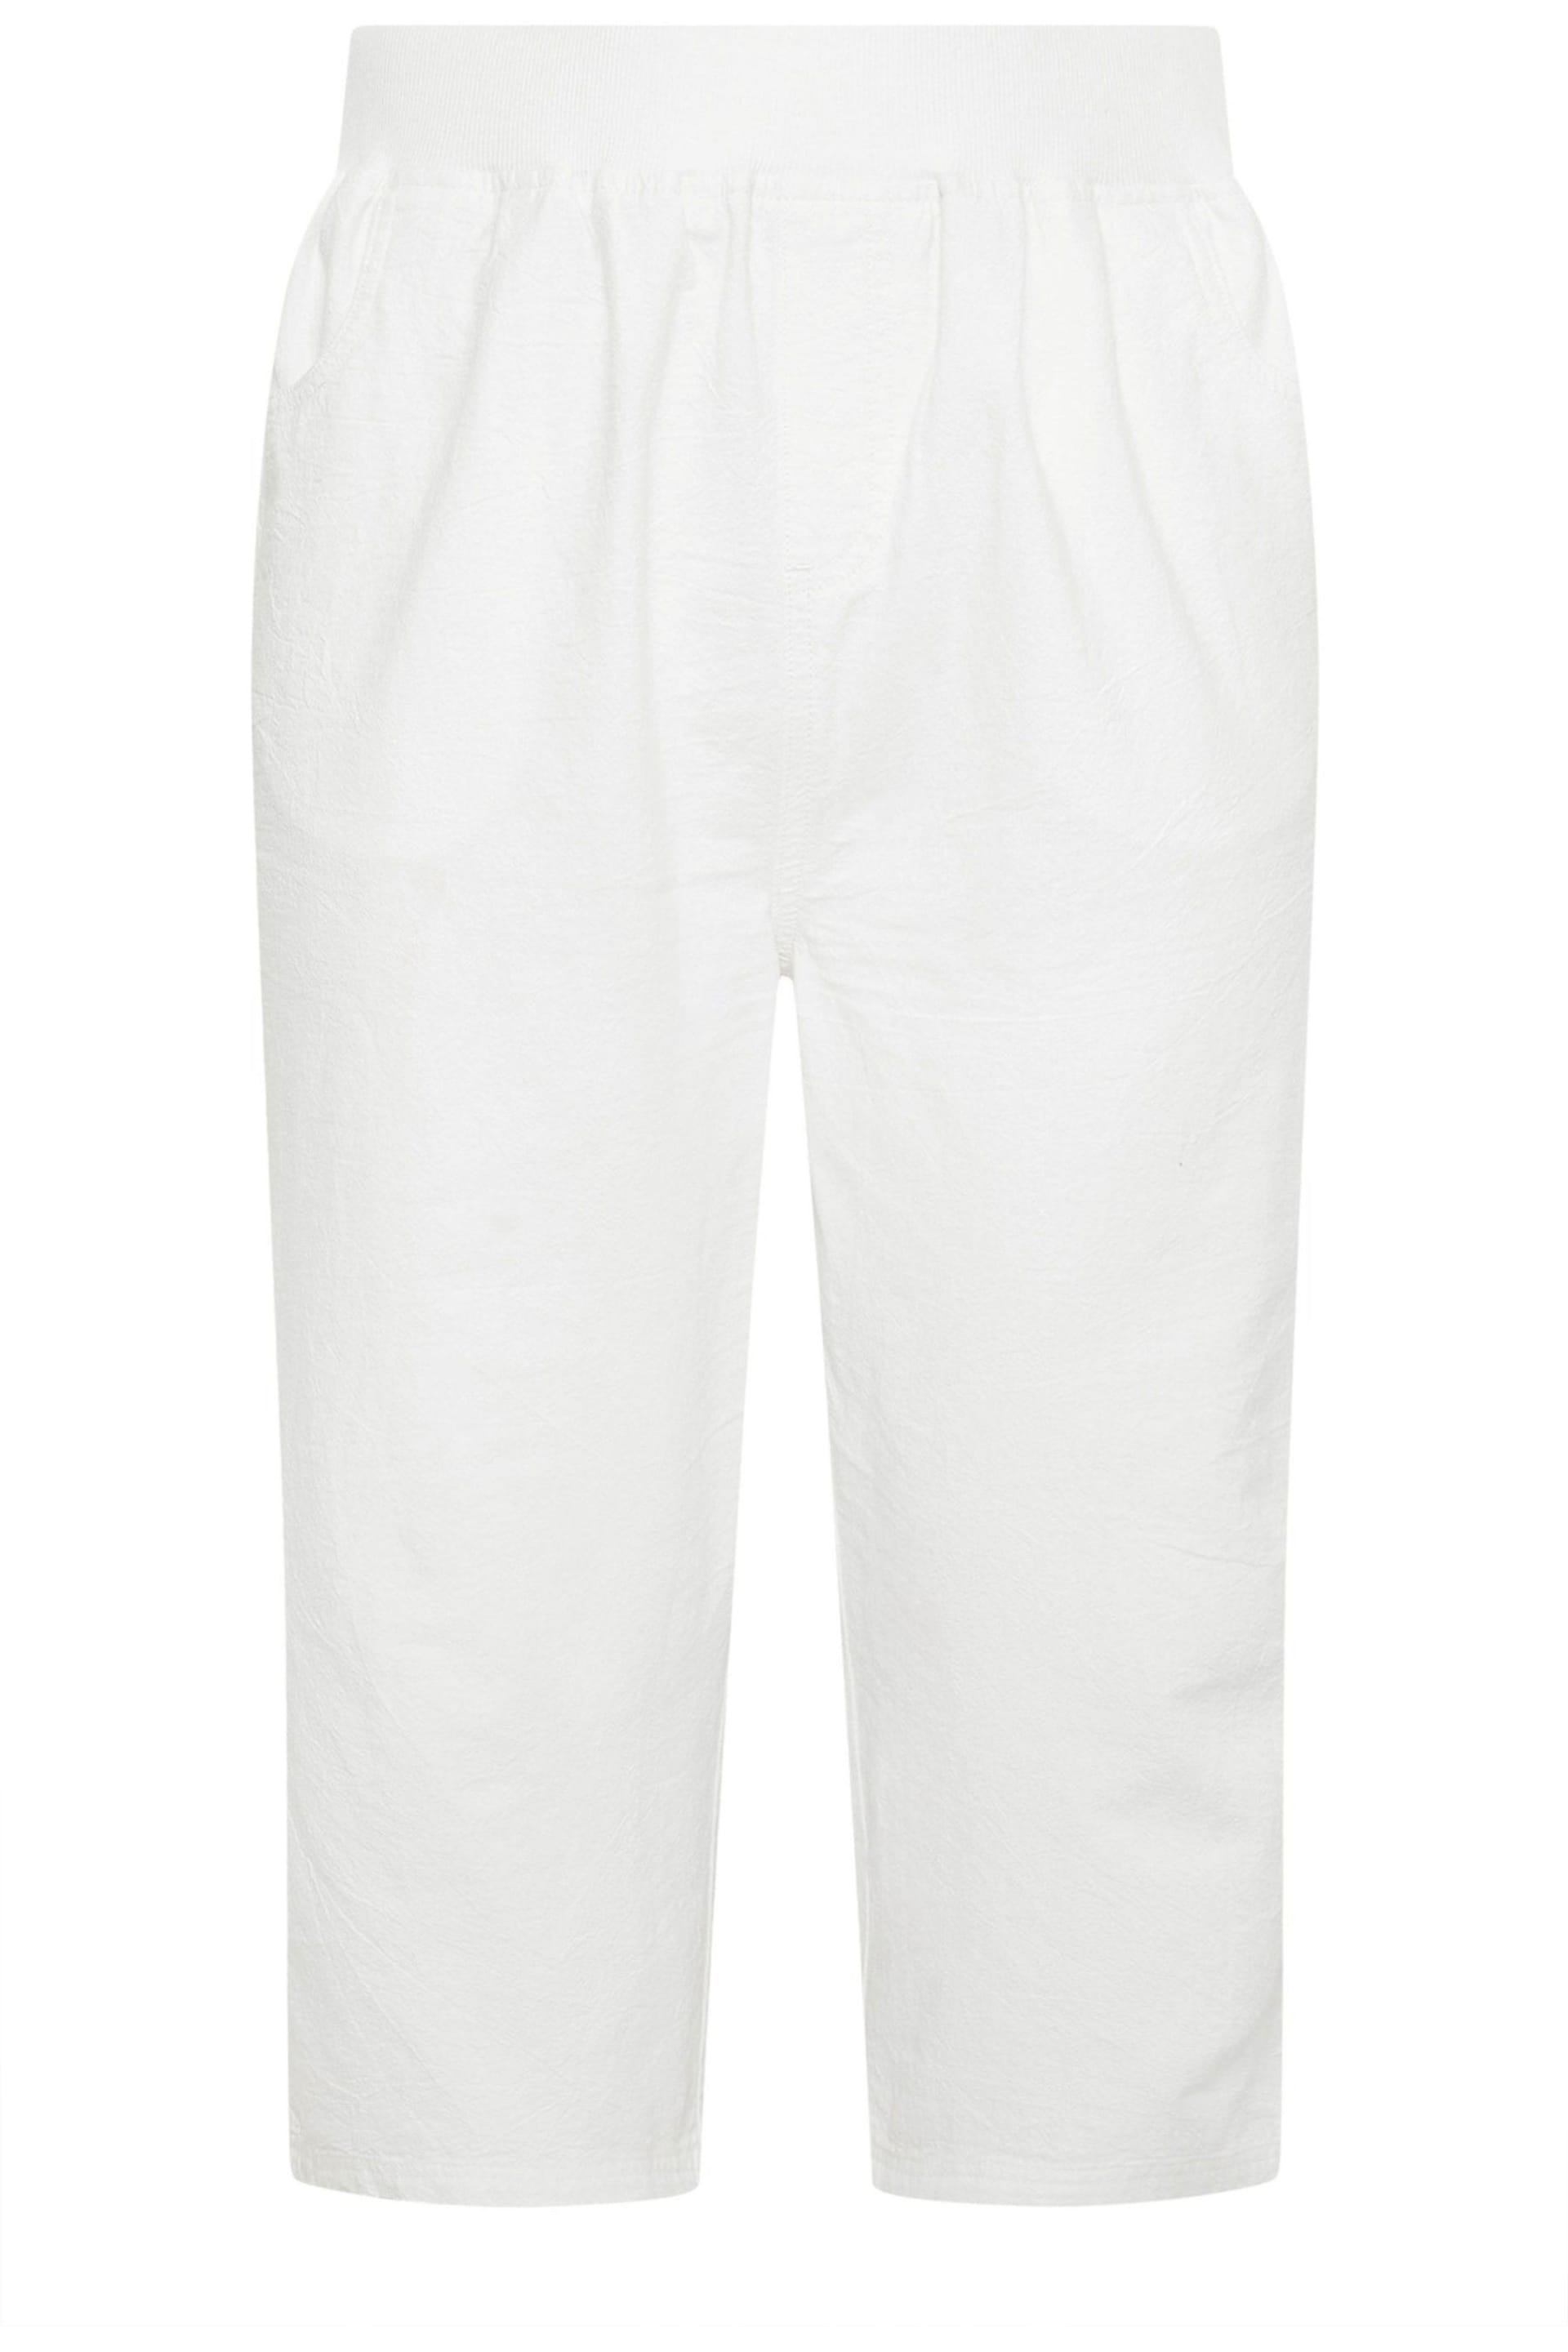 Yours Curve White Cool Cotton Cropped Trousers With Jersey Waist Band - Image 5 of 5